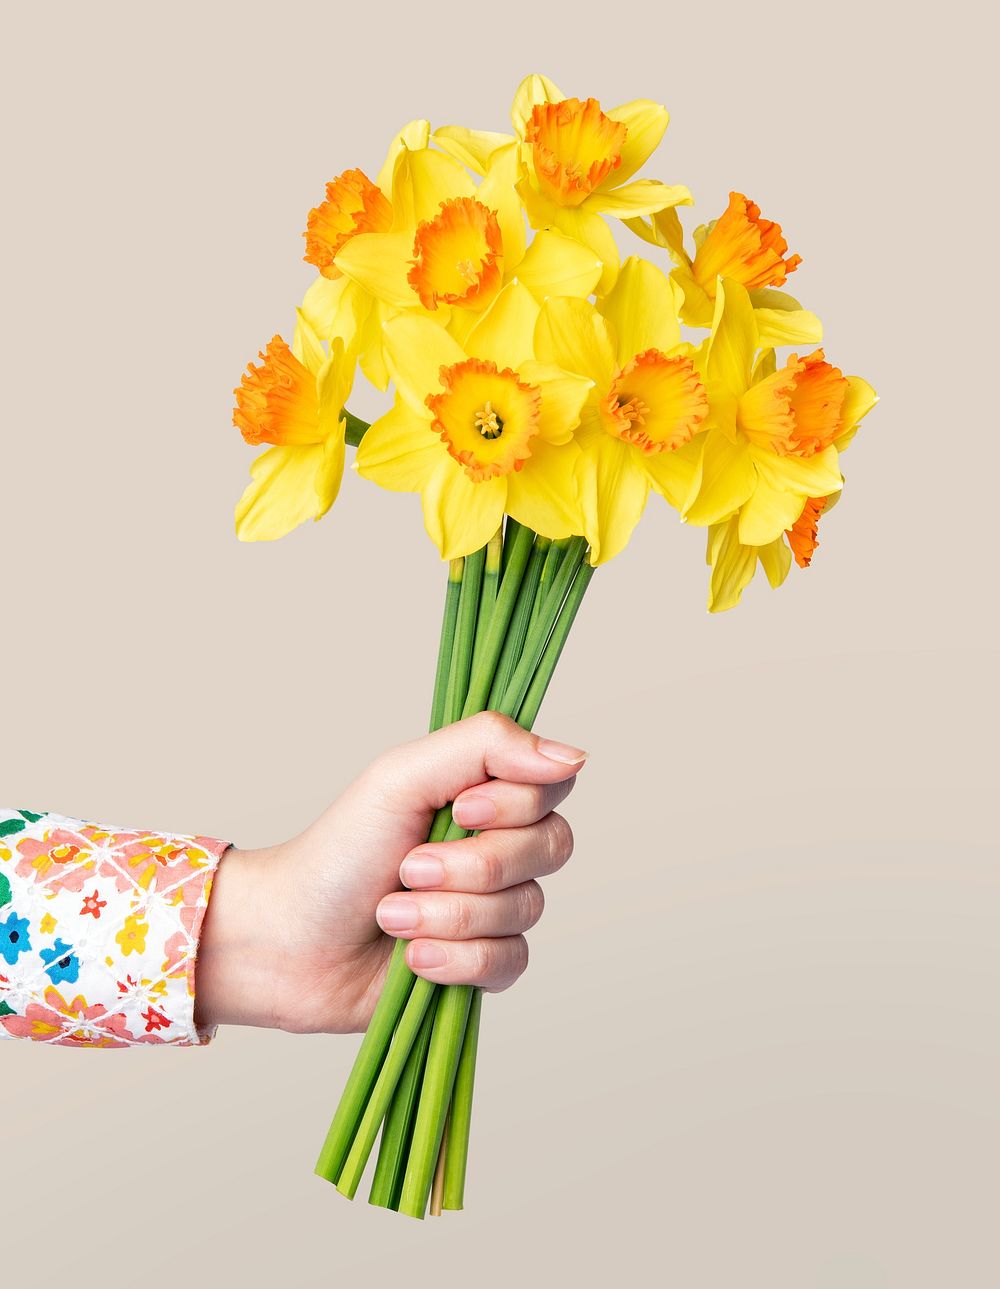 Daffodil held by hand, collage element psd